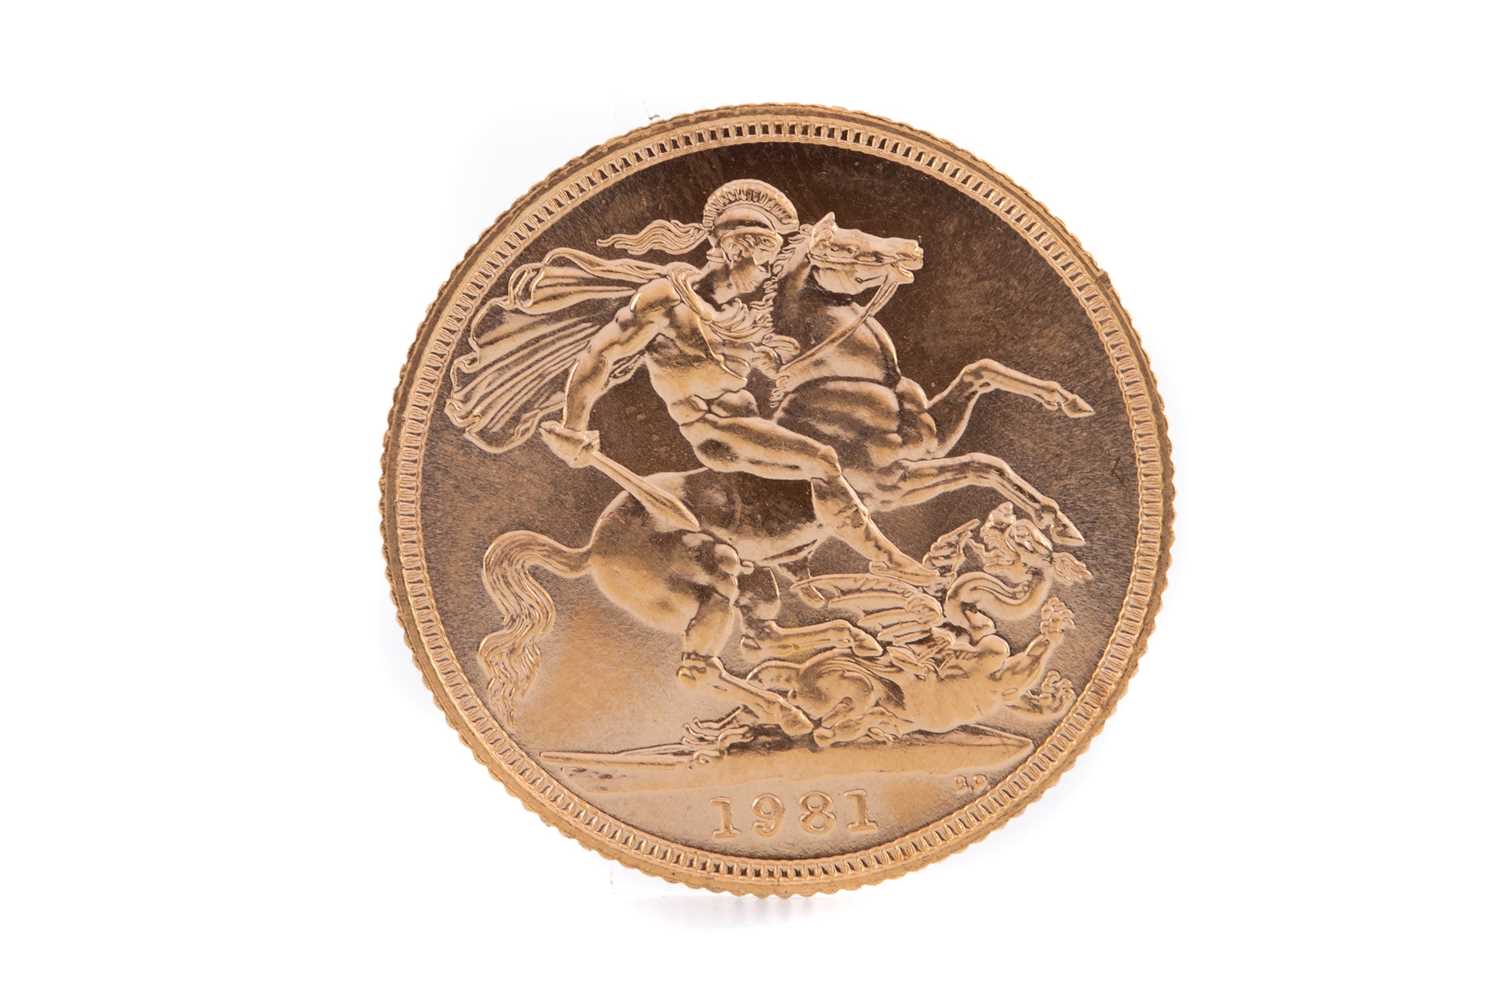 Lot 75 - AN ELIZABETH II GOLD SOVEREIGN DATED 1981